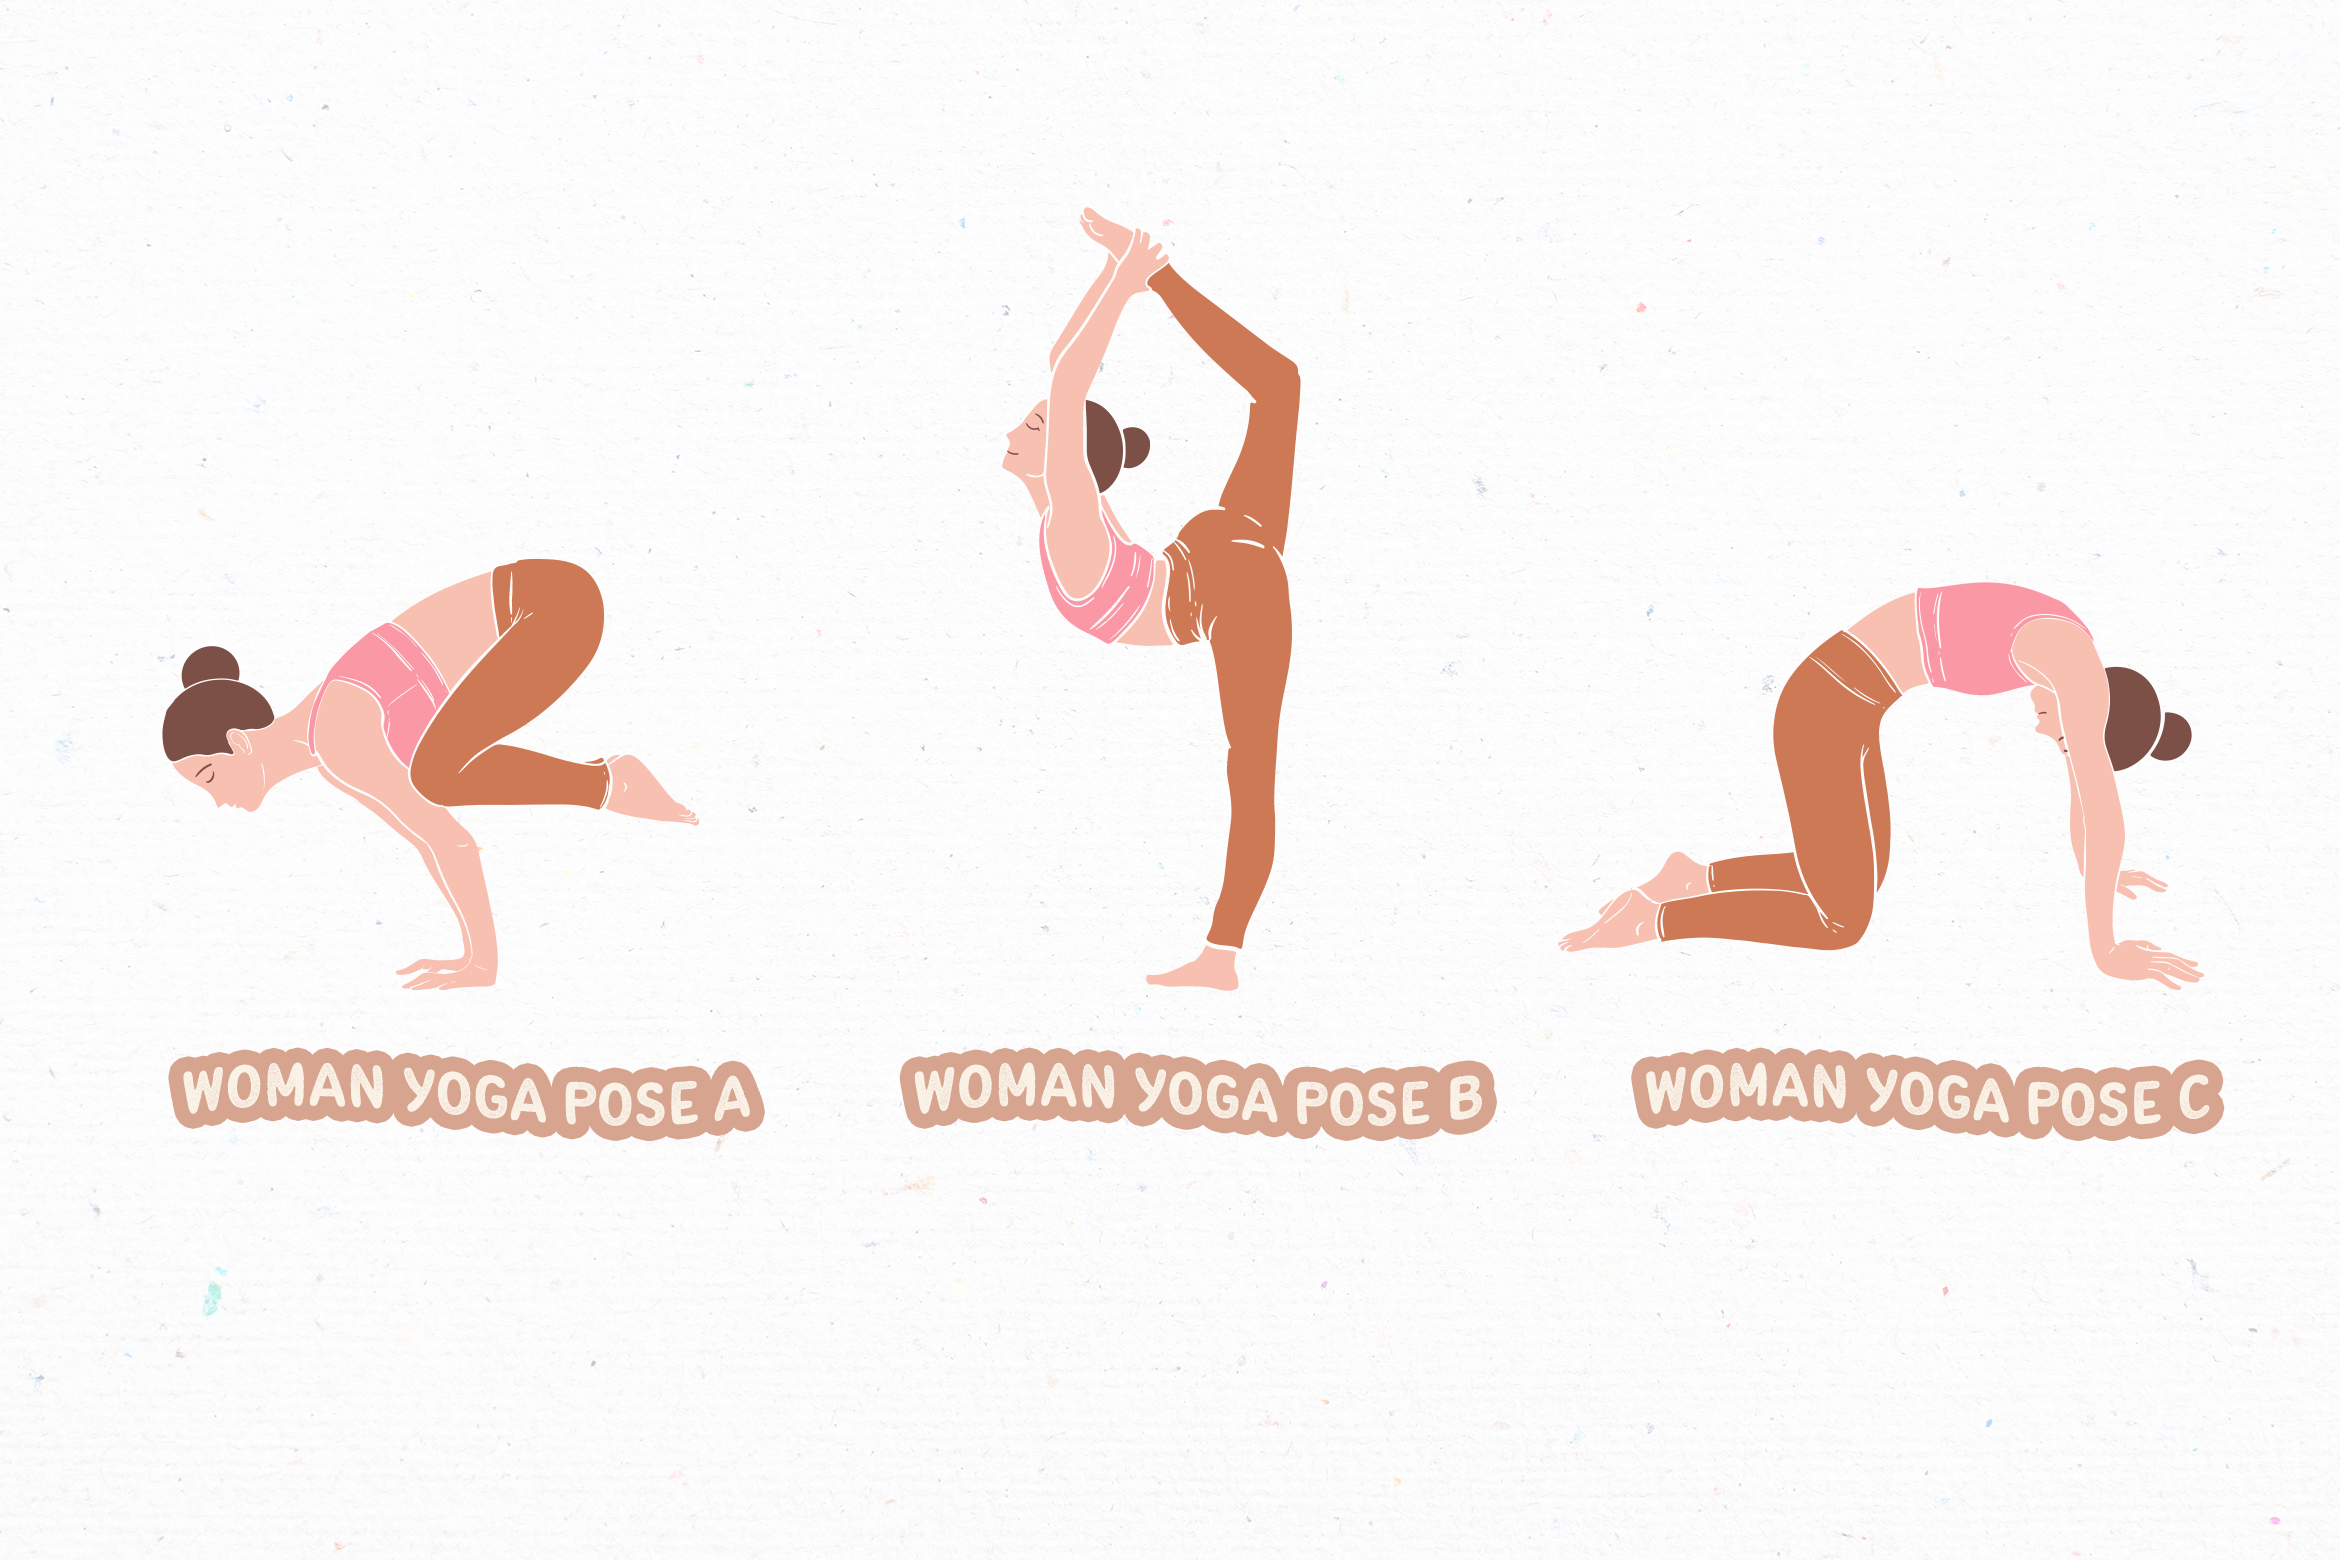 https://peterdraw.studio/wp-content/uploads/2023/06/Pinky-Brown-Woman-Yoga-Poses-Illustration-Set-with-Tan-Pink-Brown-Dark-Brown-and-White-colors-2.png